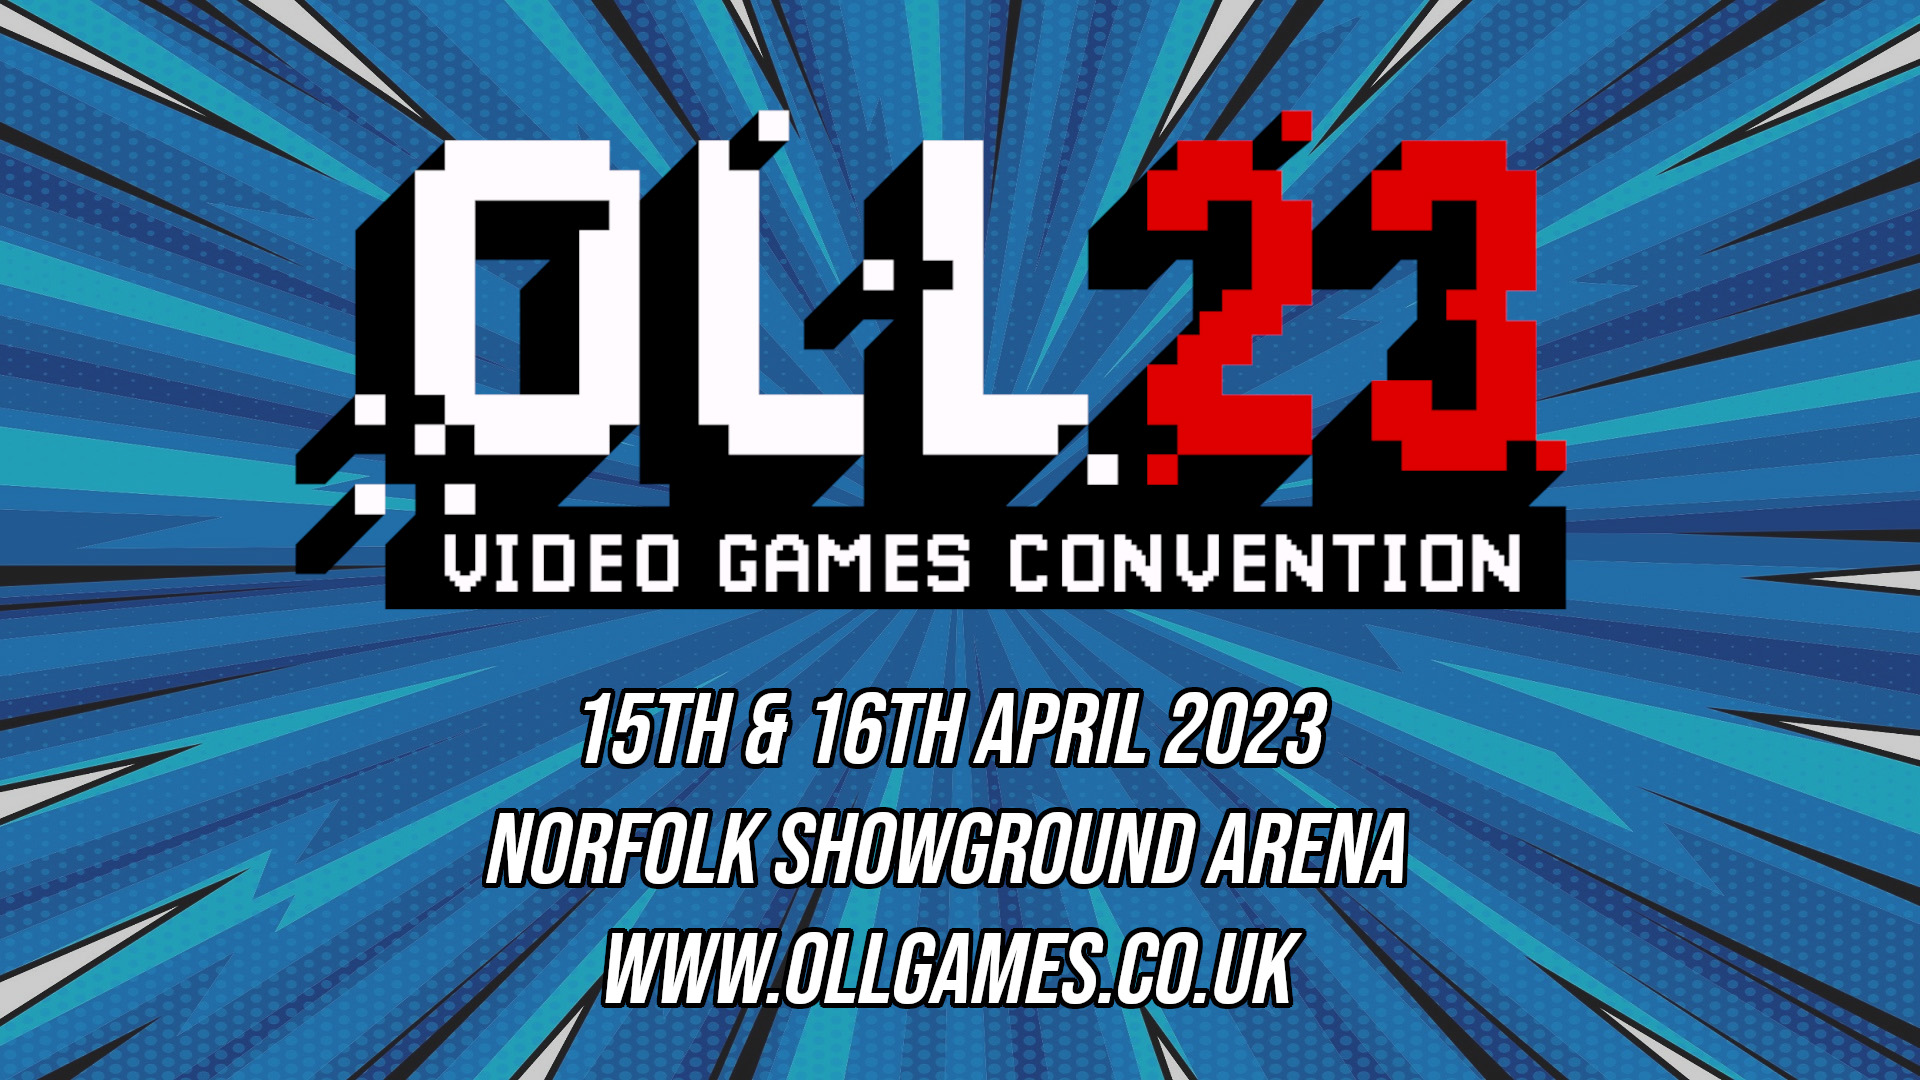 OLL 23 Video Games Convention